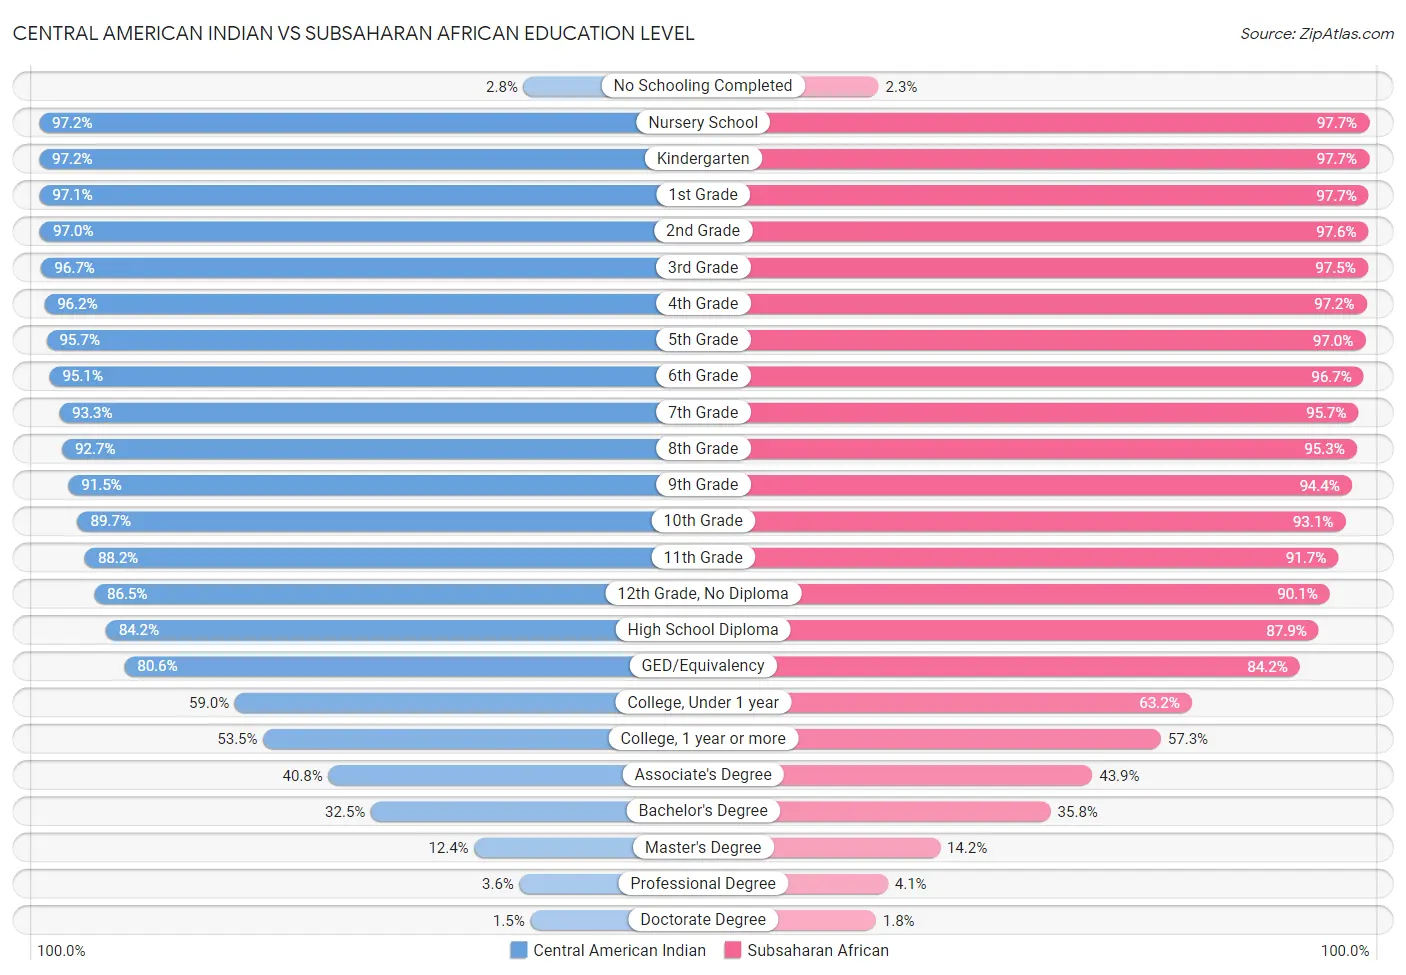 Central American Indian vs Subsaharan African Education Level